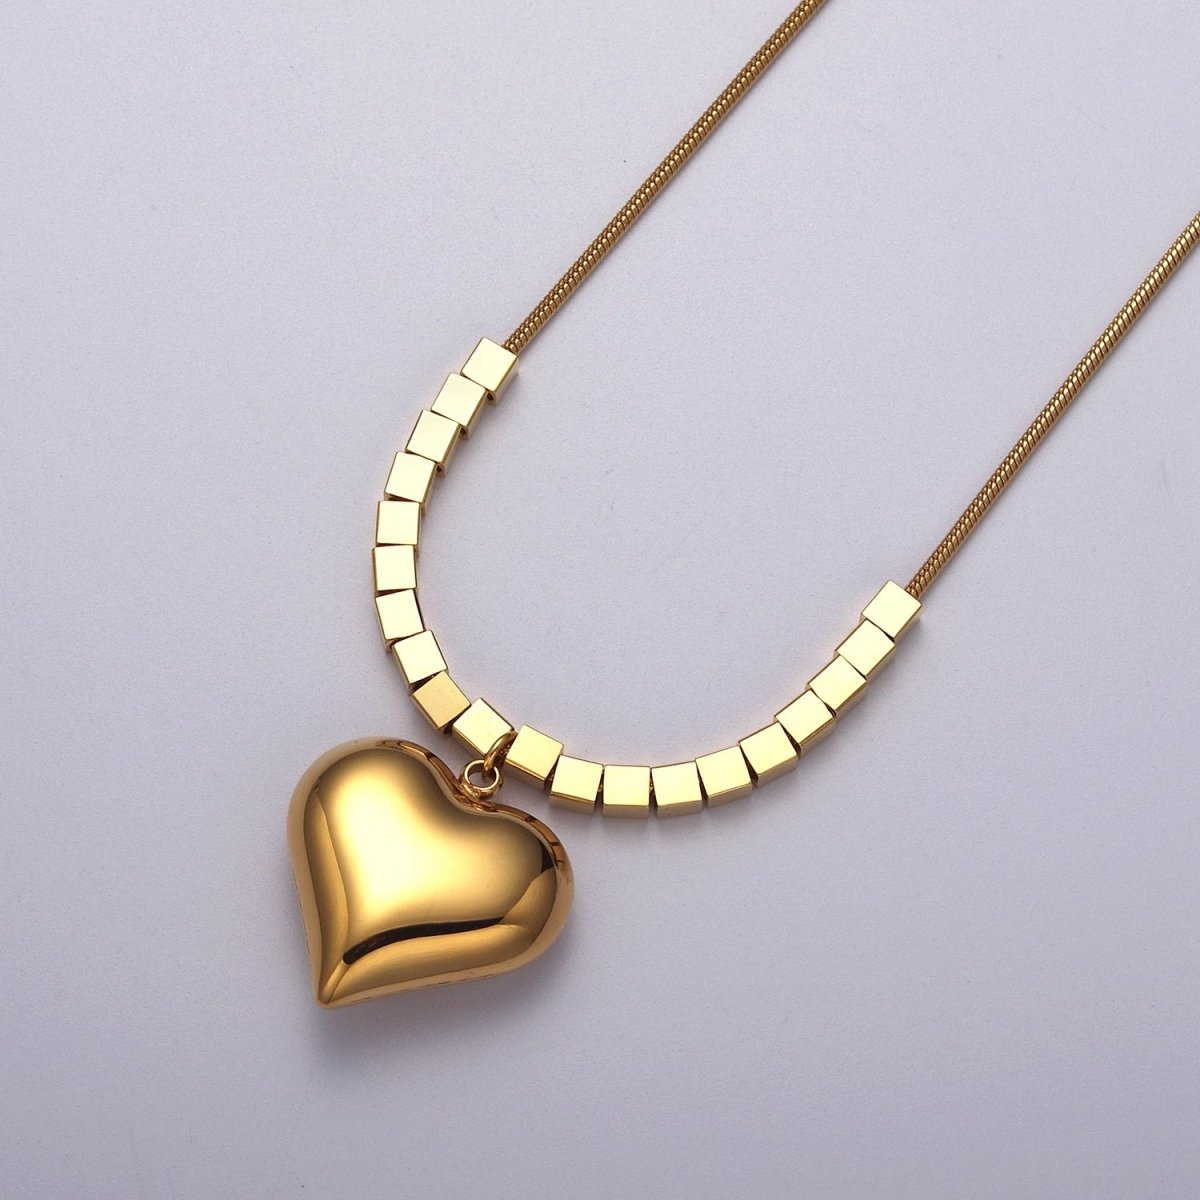 OS Clearance Pricing BLOWOUT Gold Heart Necklace Puff Heart Pendant Waterproof Chain Tarnish Free Pendant Stainless Steel WA-916 - DLUXCA